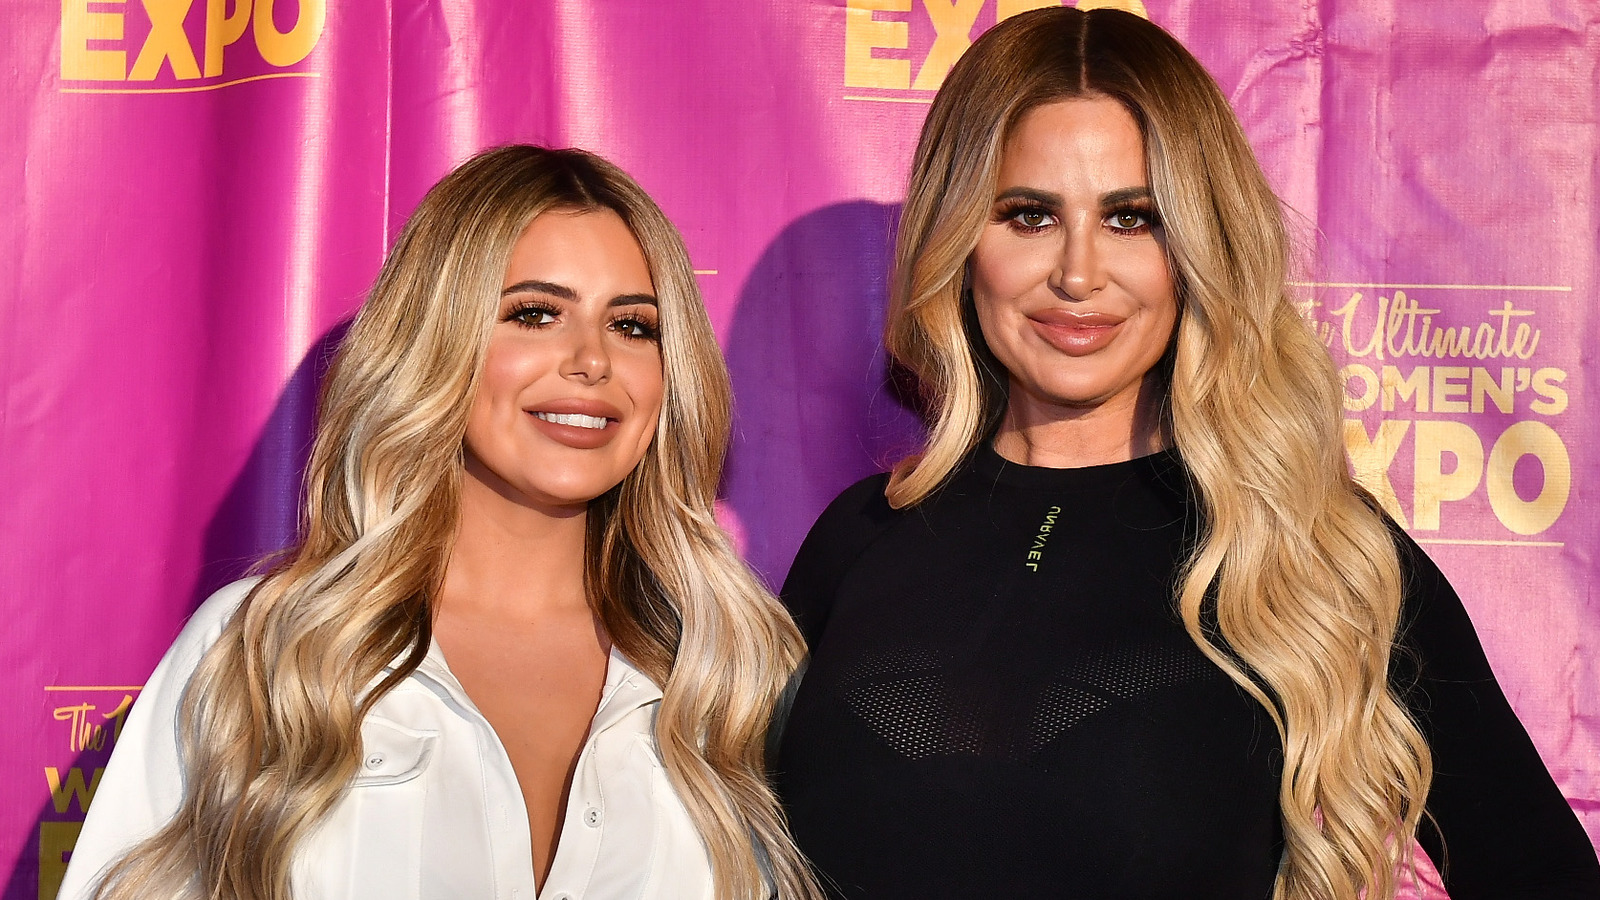 The Unsaid Truth about Brielle Biermann's relationship with her mom